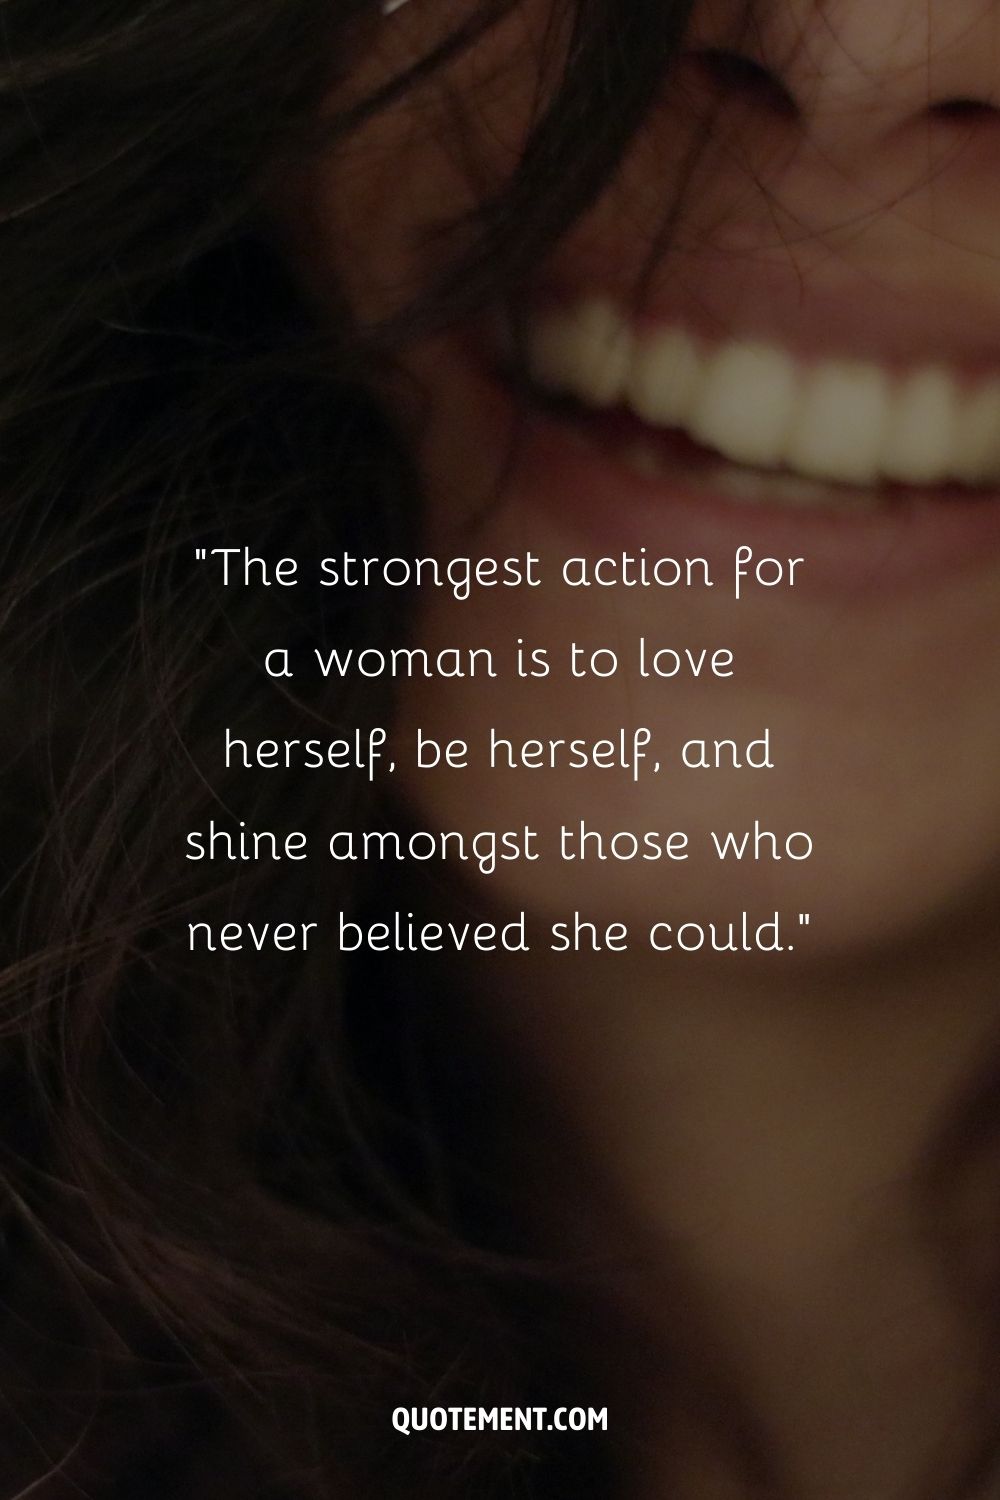 a-straight-teeth-smile-brunette-representing-strong-woman-fighter-quote